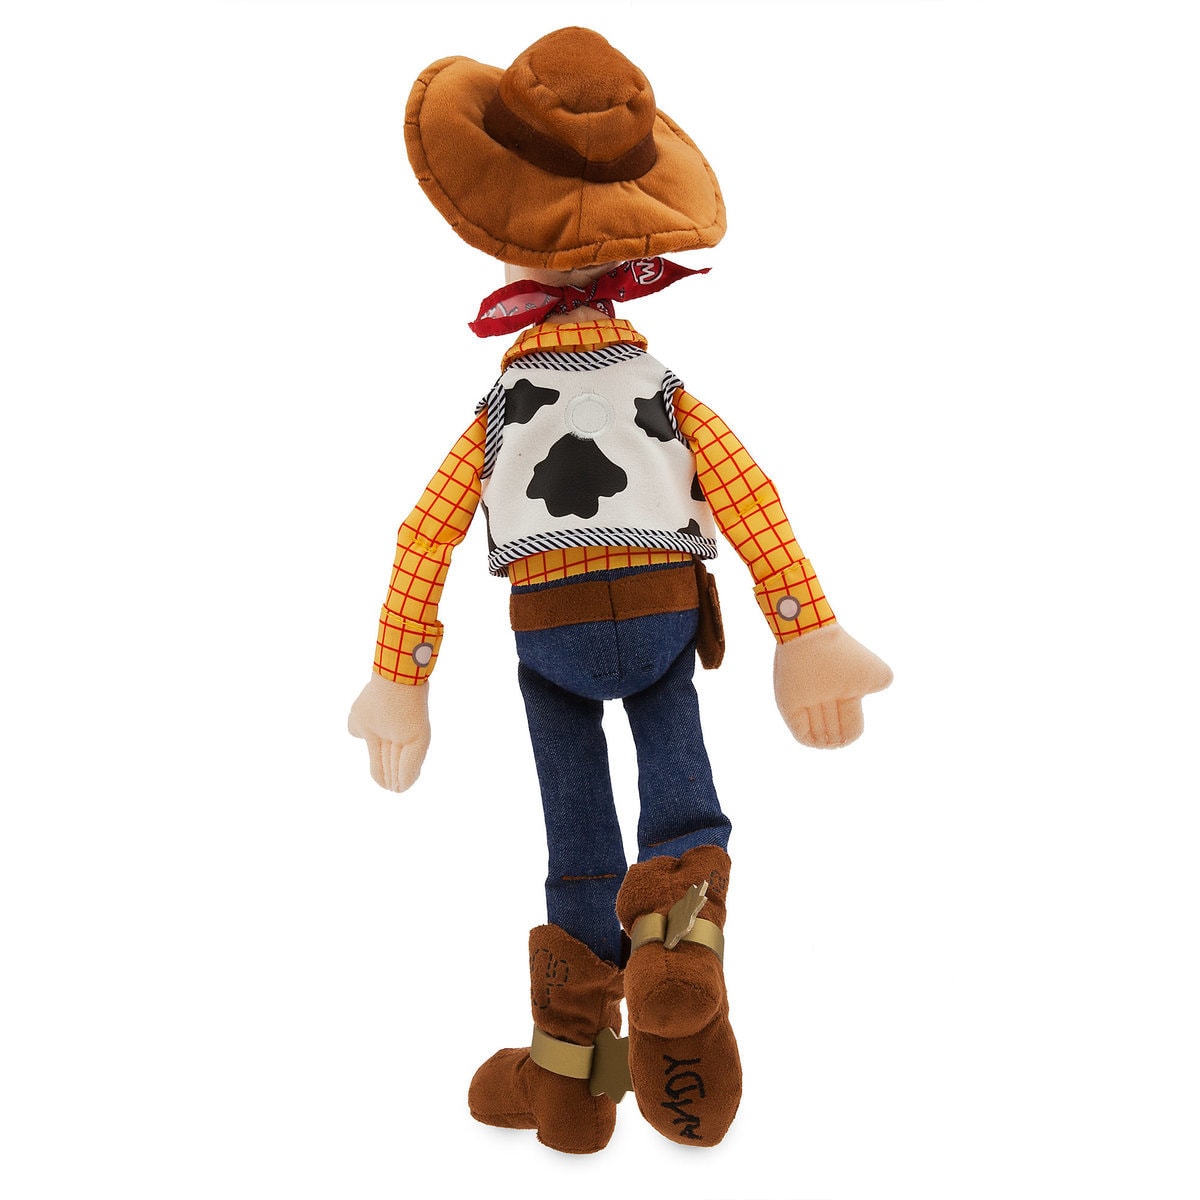 Disney Toy Story 4 Woody Medium Plush New with Tags